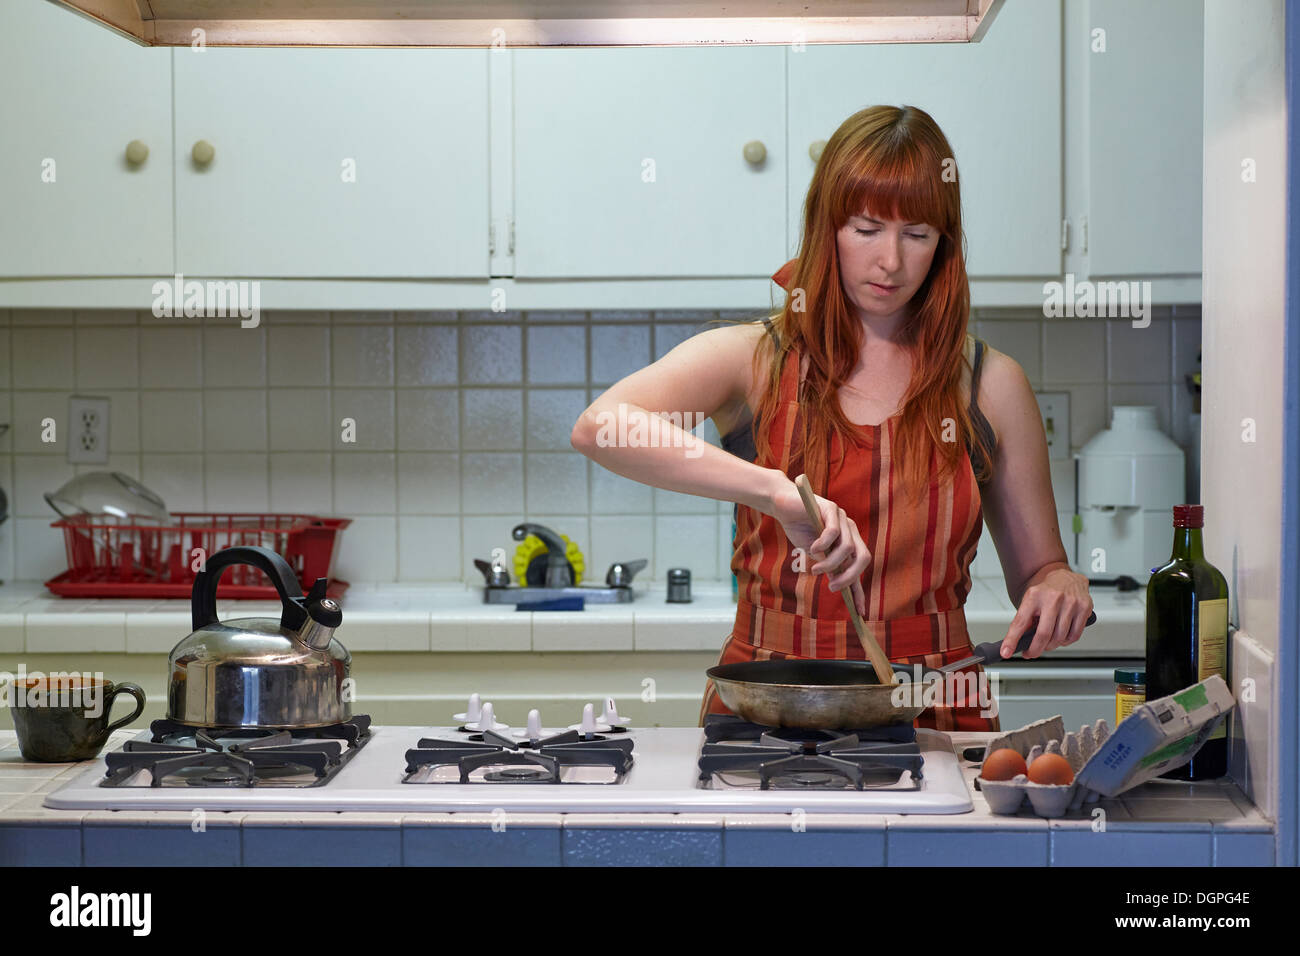 Mid adult woman cooking in kitchen Stock Photo